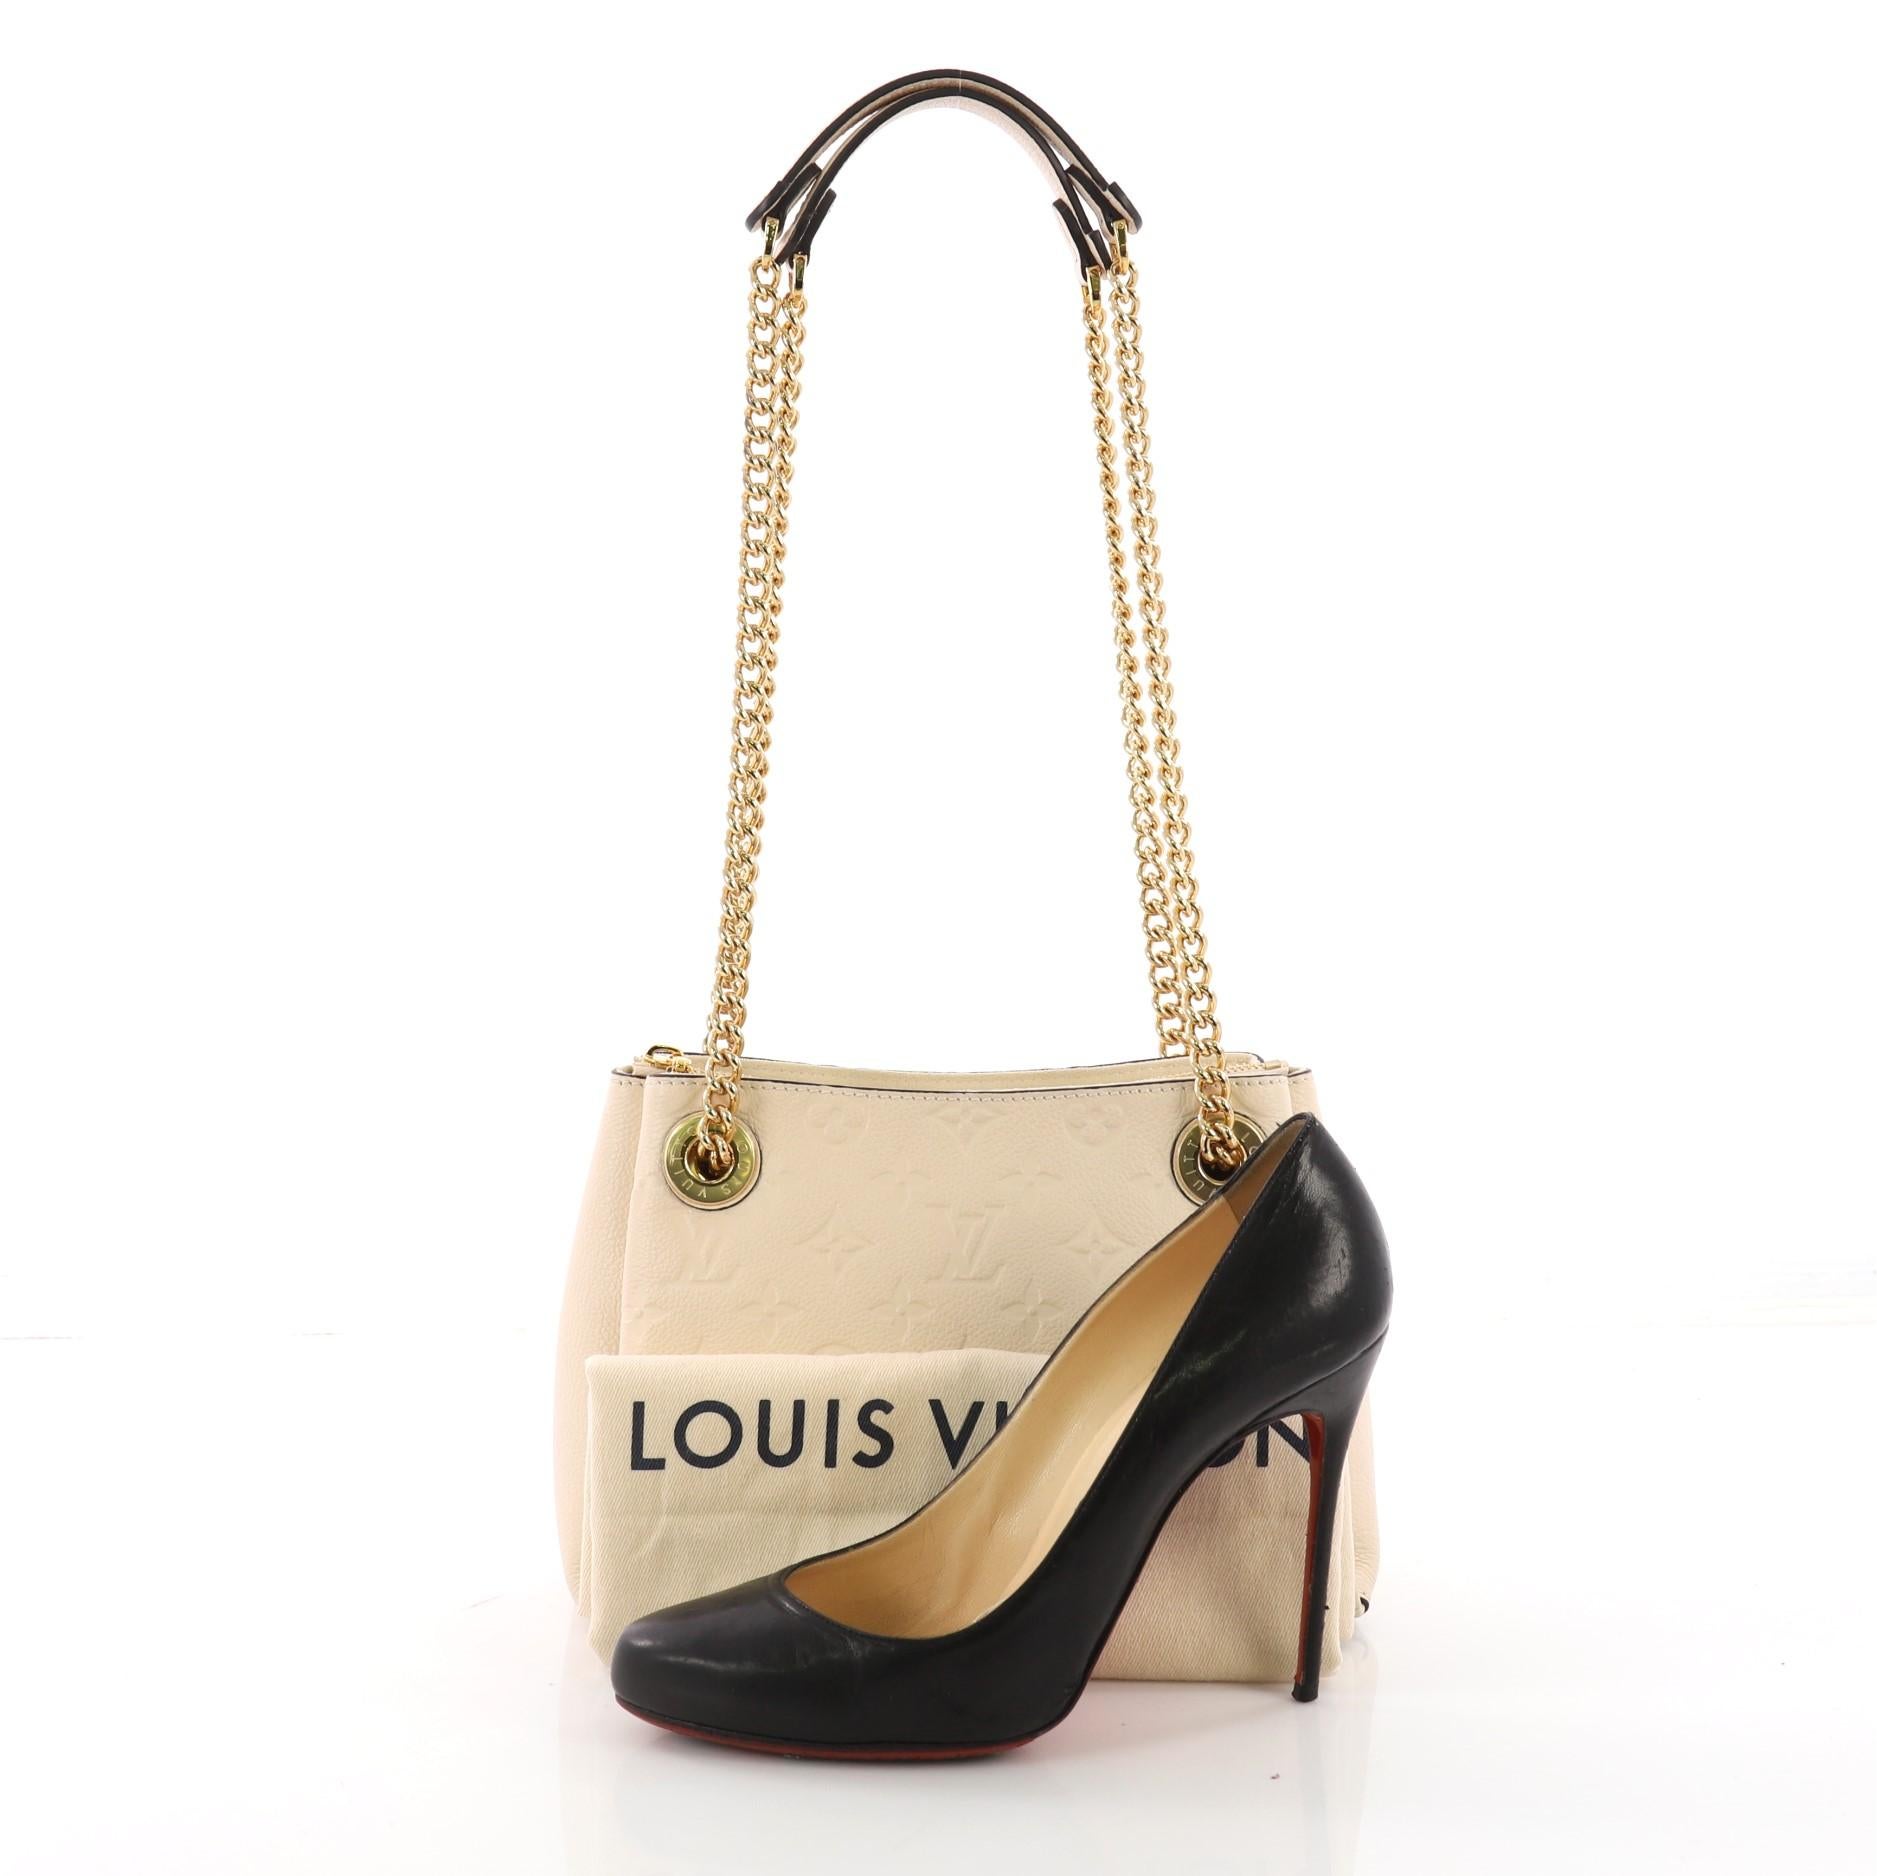 This Louis Vuitton Surene Handbag Monogram Empreinte Leather BB, crafted from cream monogram empreinte leather, features dual chain link straps with leather pads and gold-tone hardware, It opens to a cream microfiber interior showcasing three